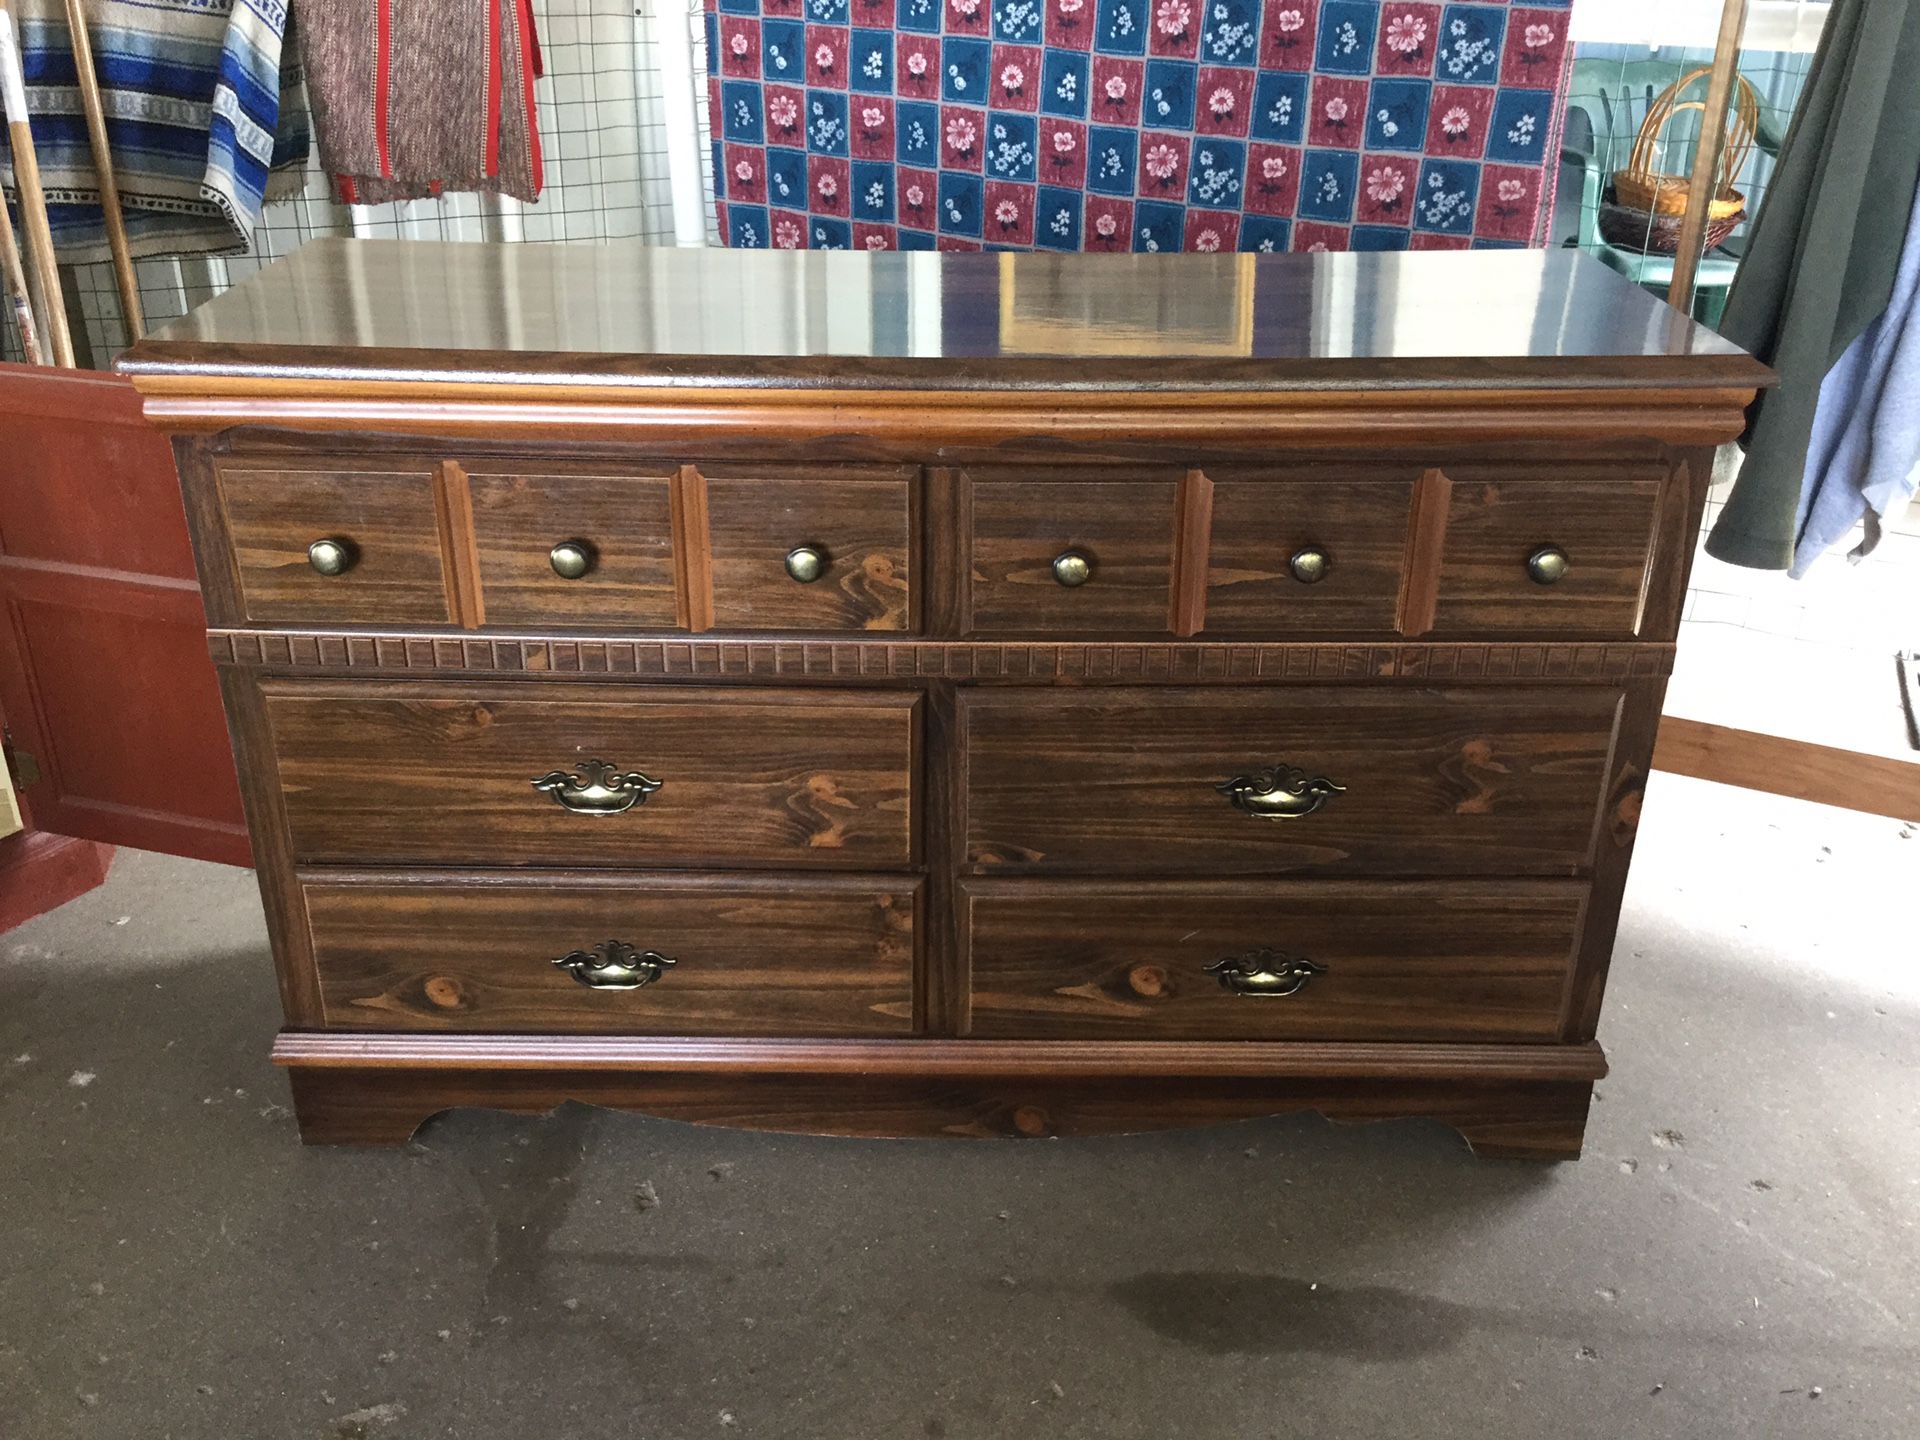 Furniture. NO HOLDS. Dresser is sold. Other furniture in this post are available